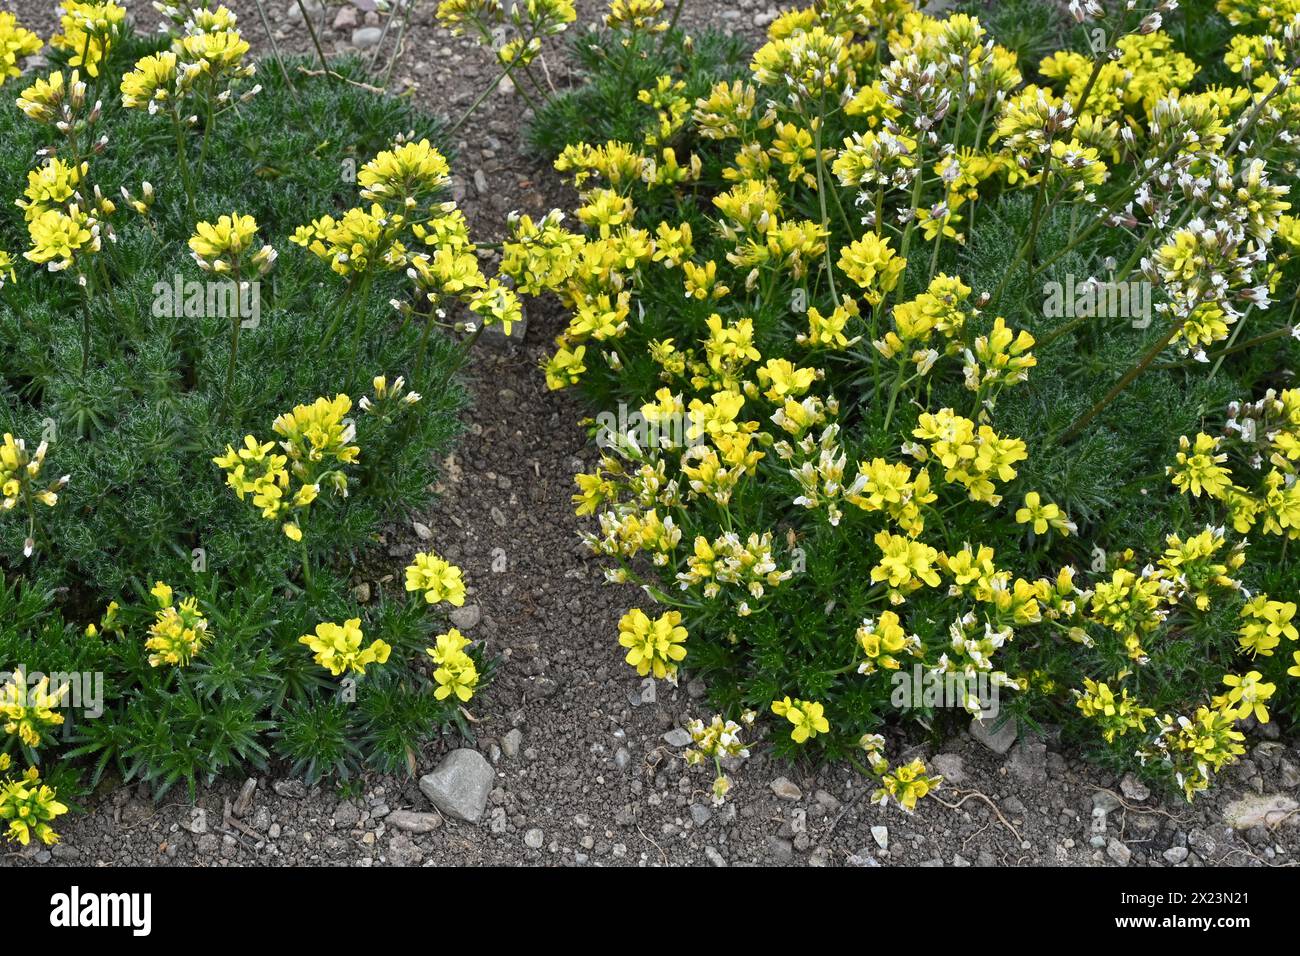 Primula veris, the cowslip is a yellow herbaceous perennial flowering plant in the primrose family Primulaceae found in St. Gallen botanical garden. Stock Photo